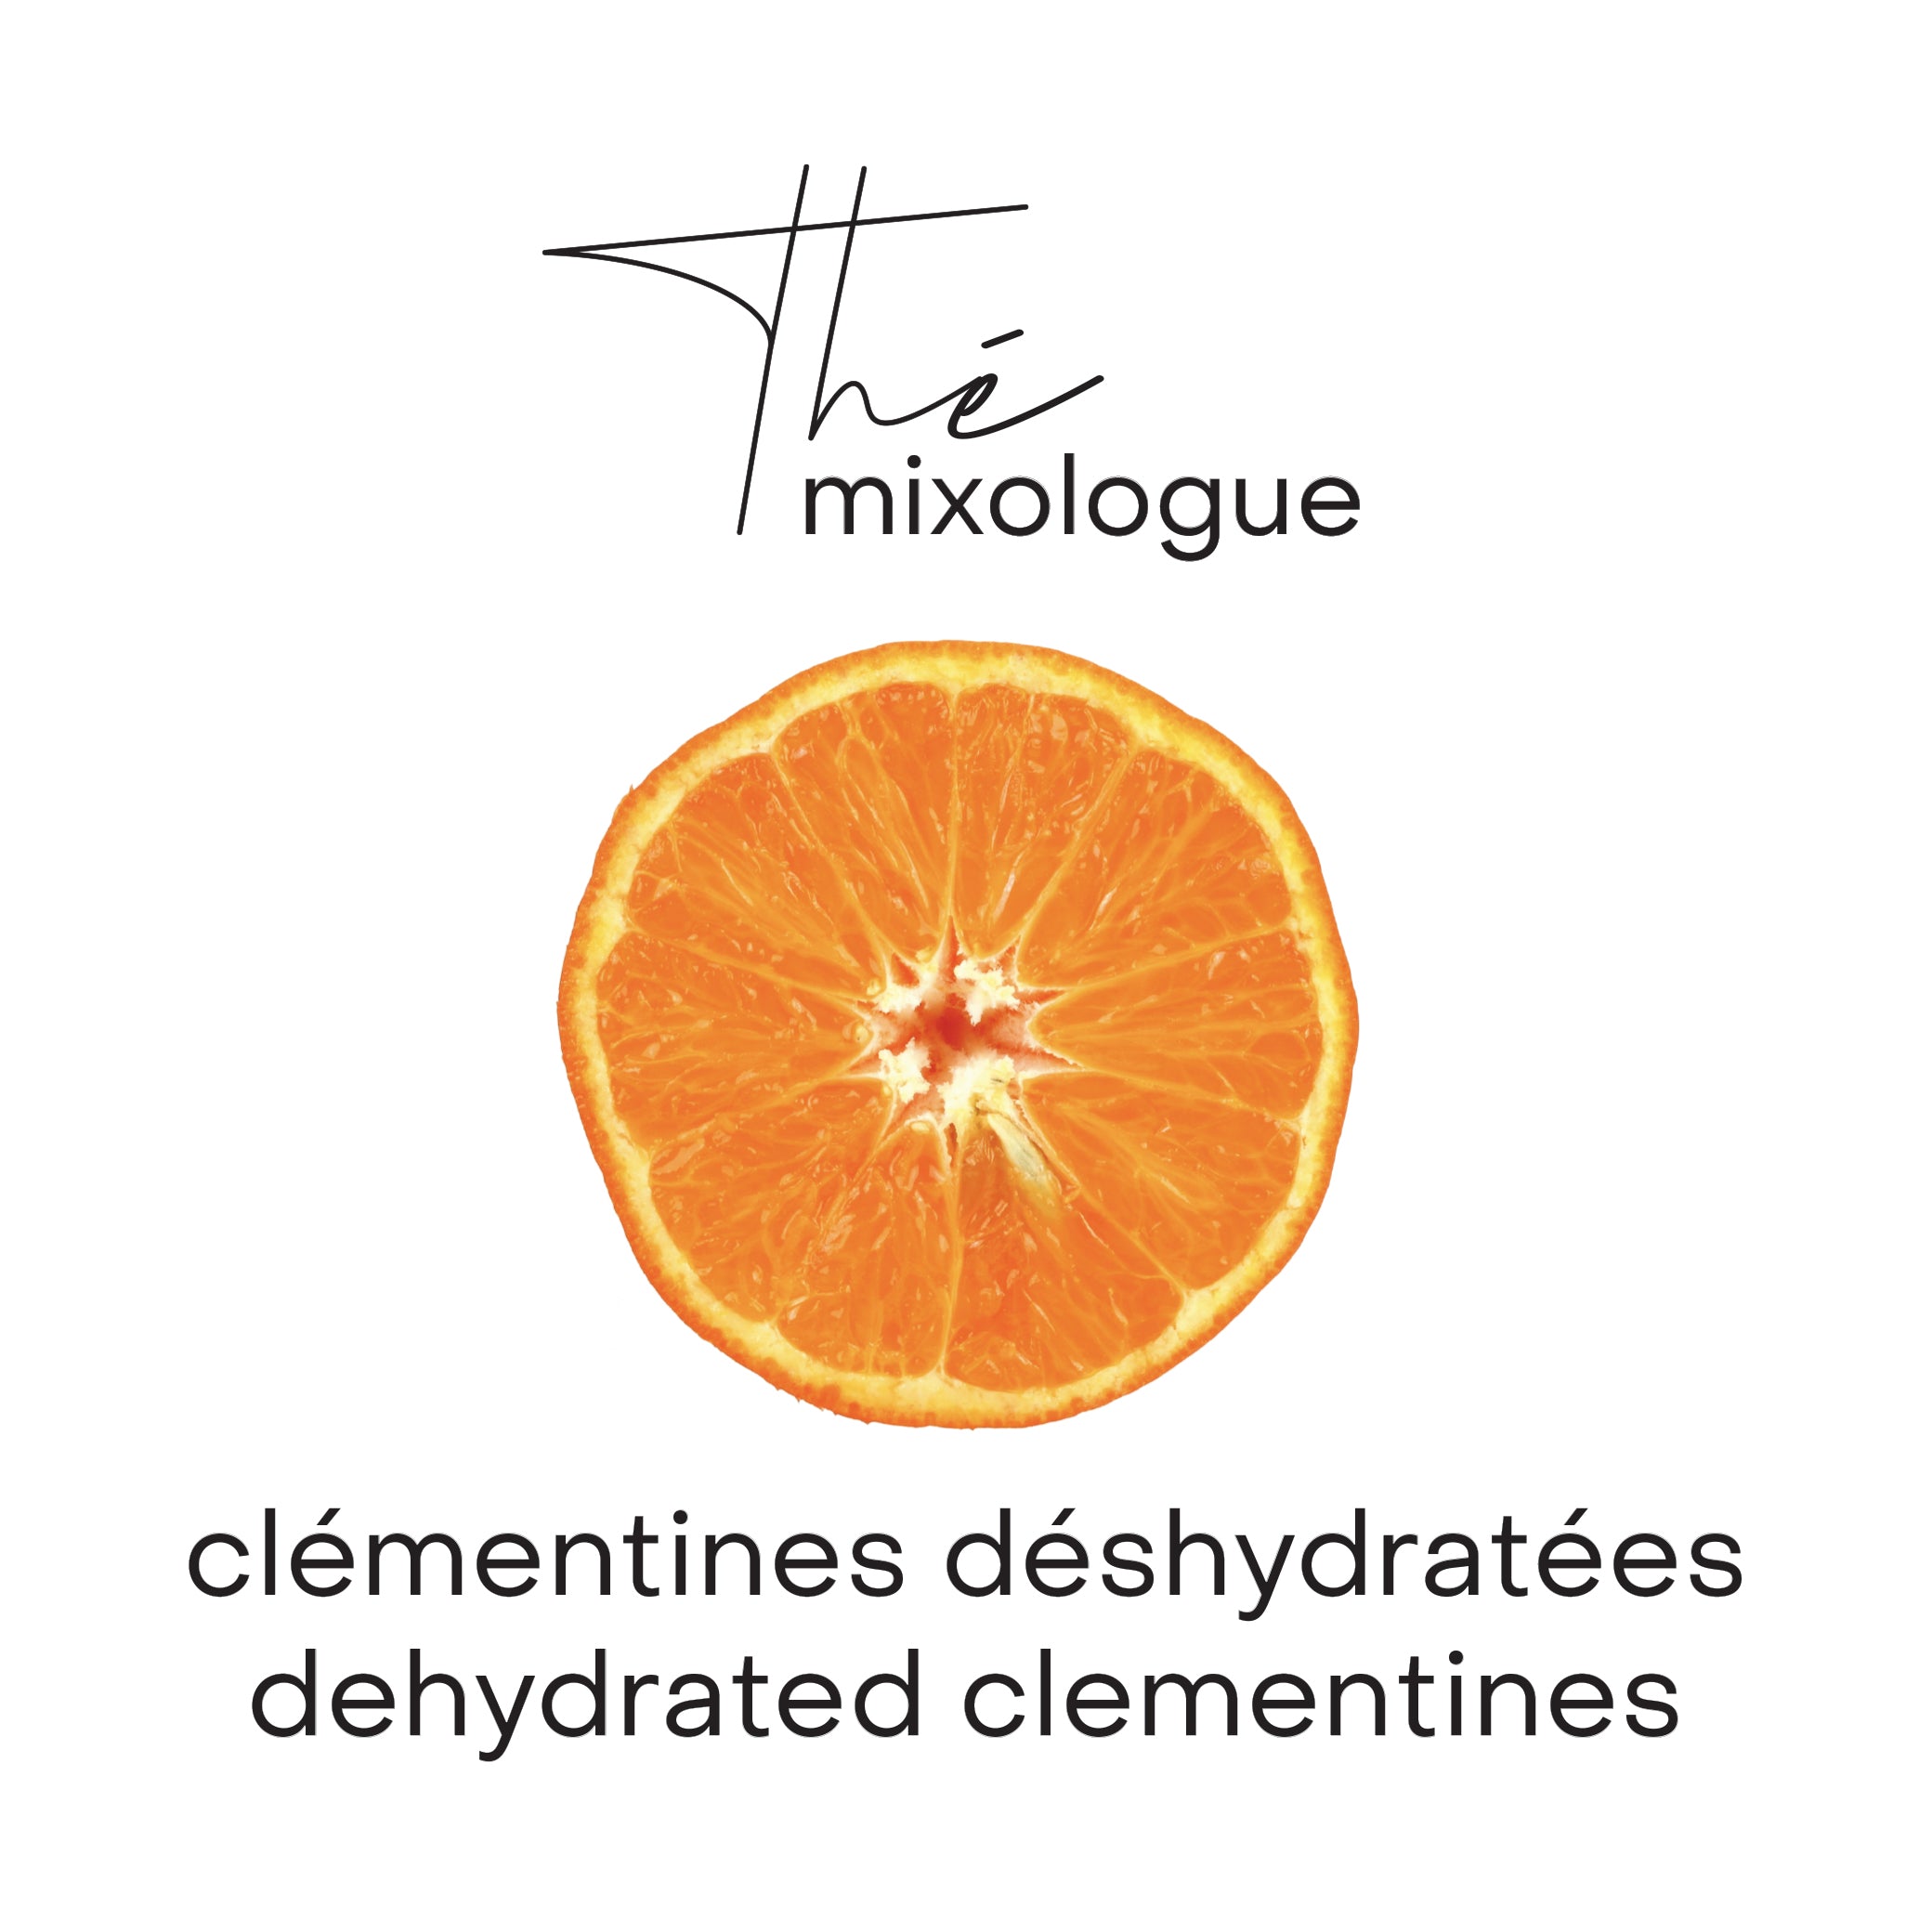 Dehydrated clementines